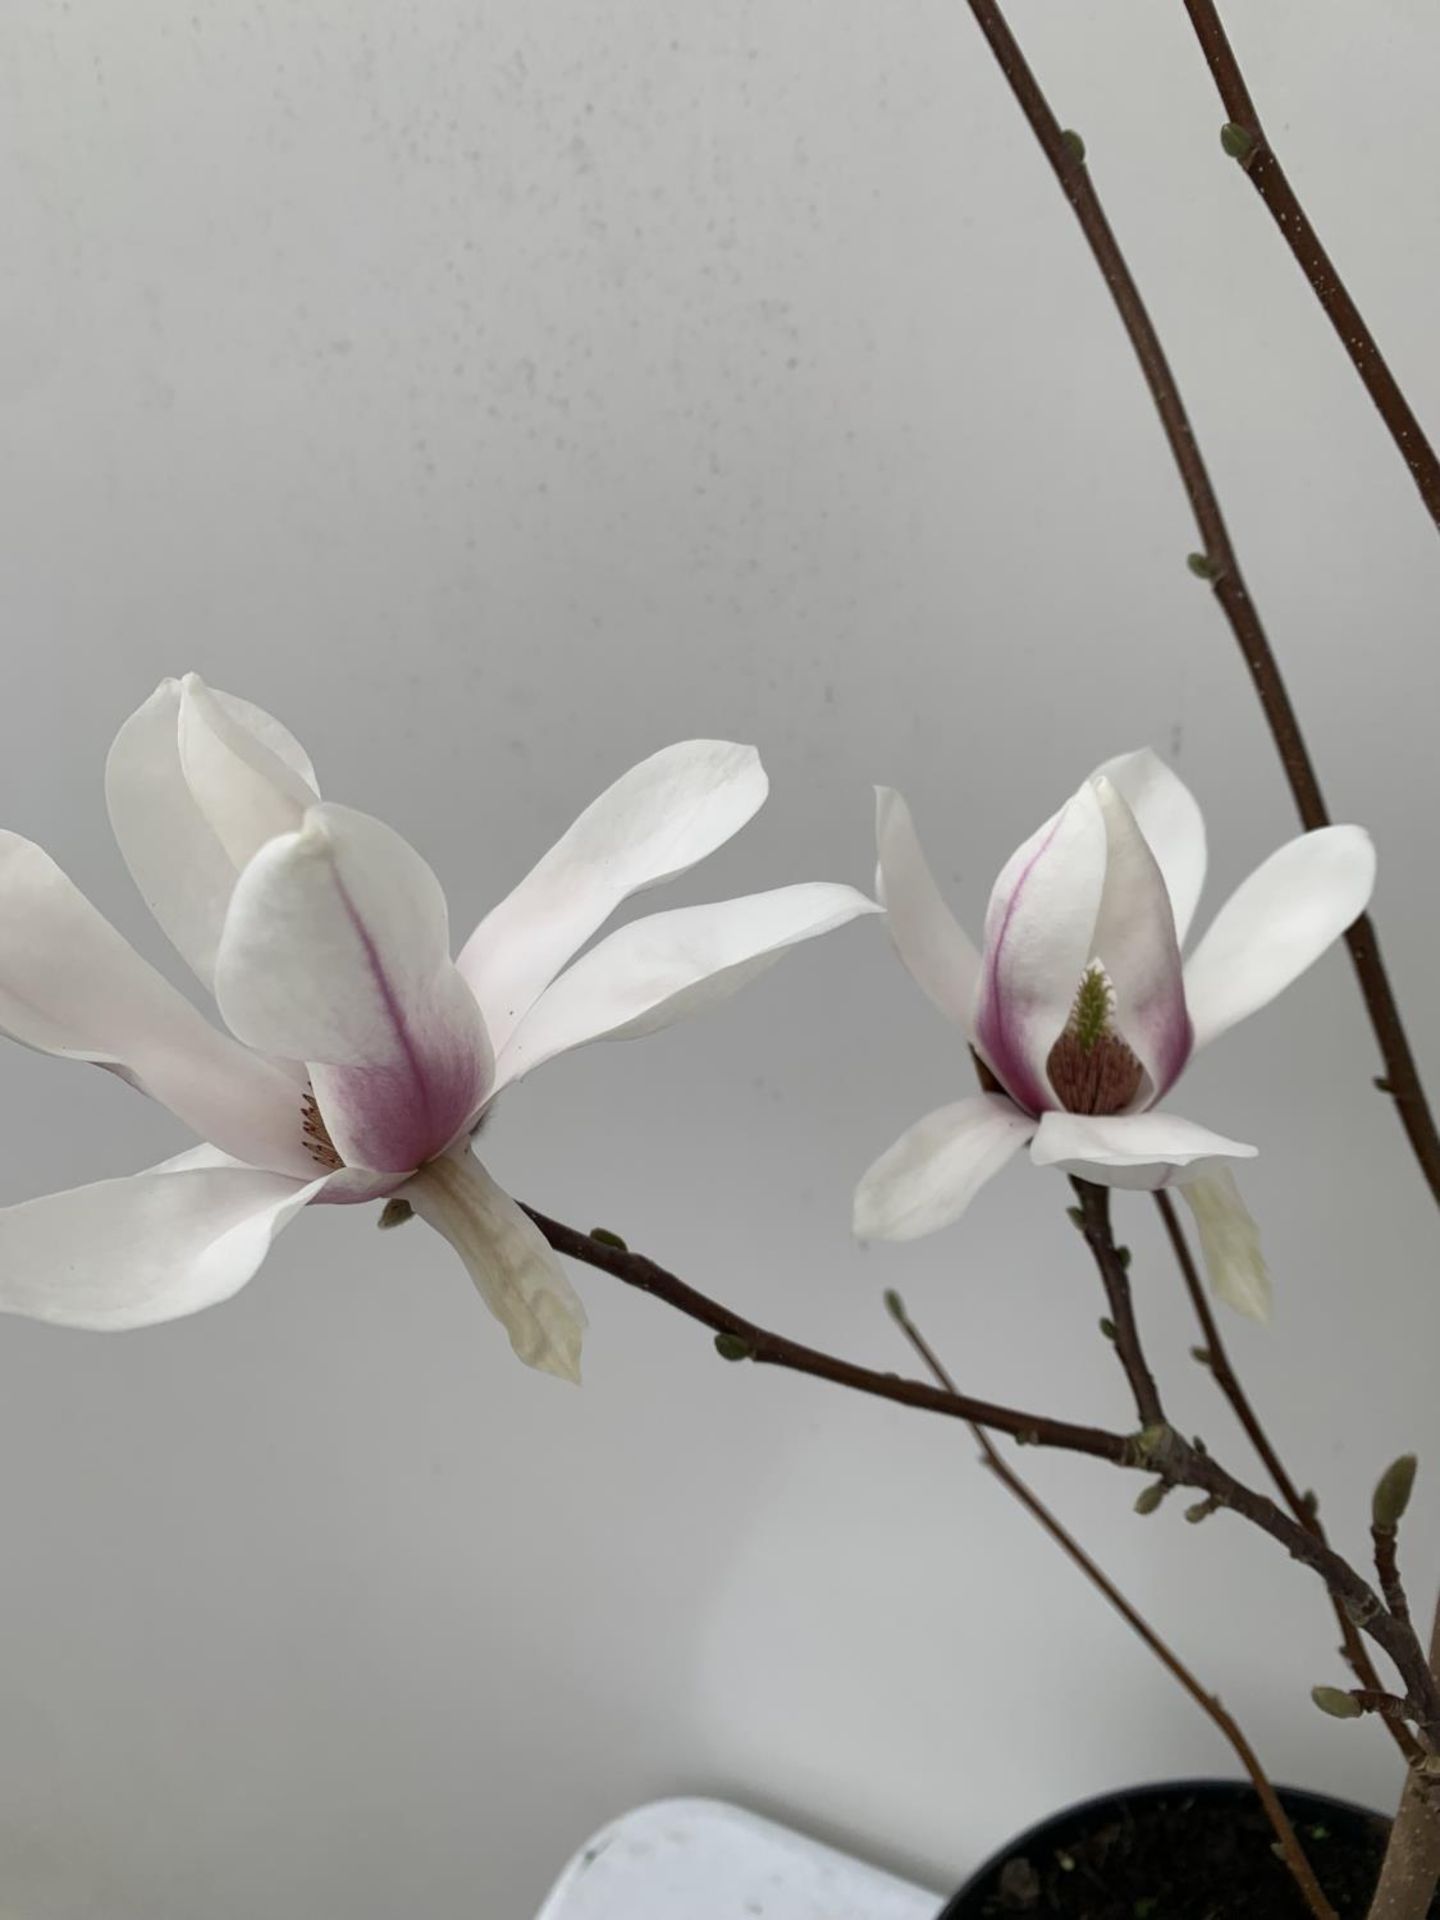 ONE MAGNOLIA SOULANGEANA 'SUPERBA' APPROX 120CM IN HEIGHT IN A 7 LTR POT PLUS VAT - Image 14 of 14